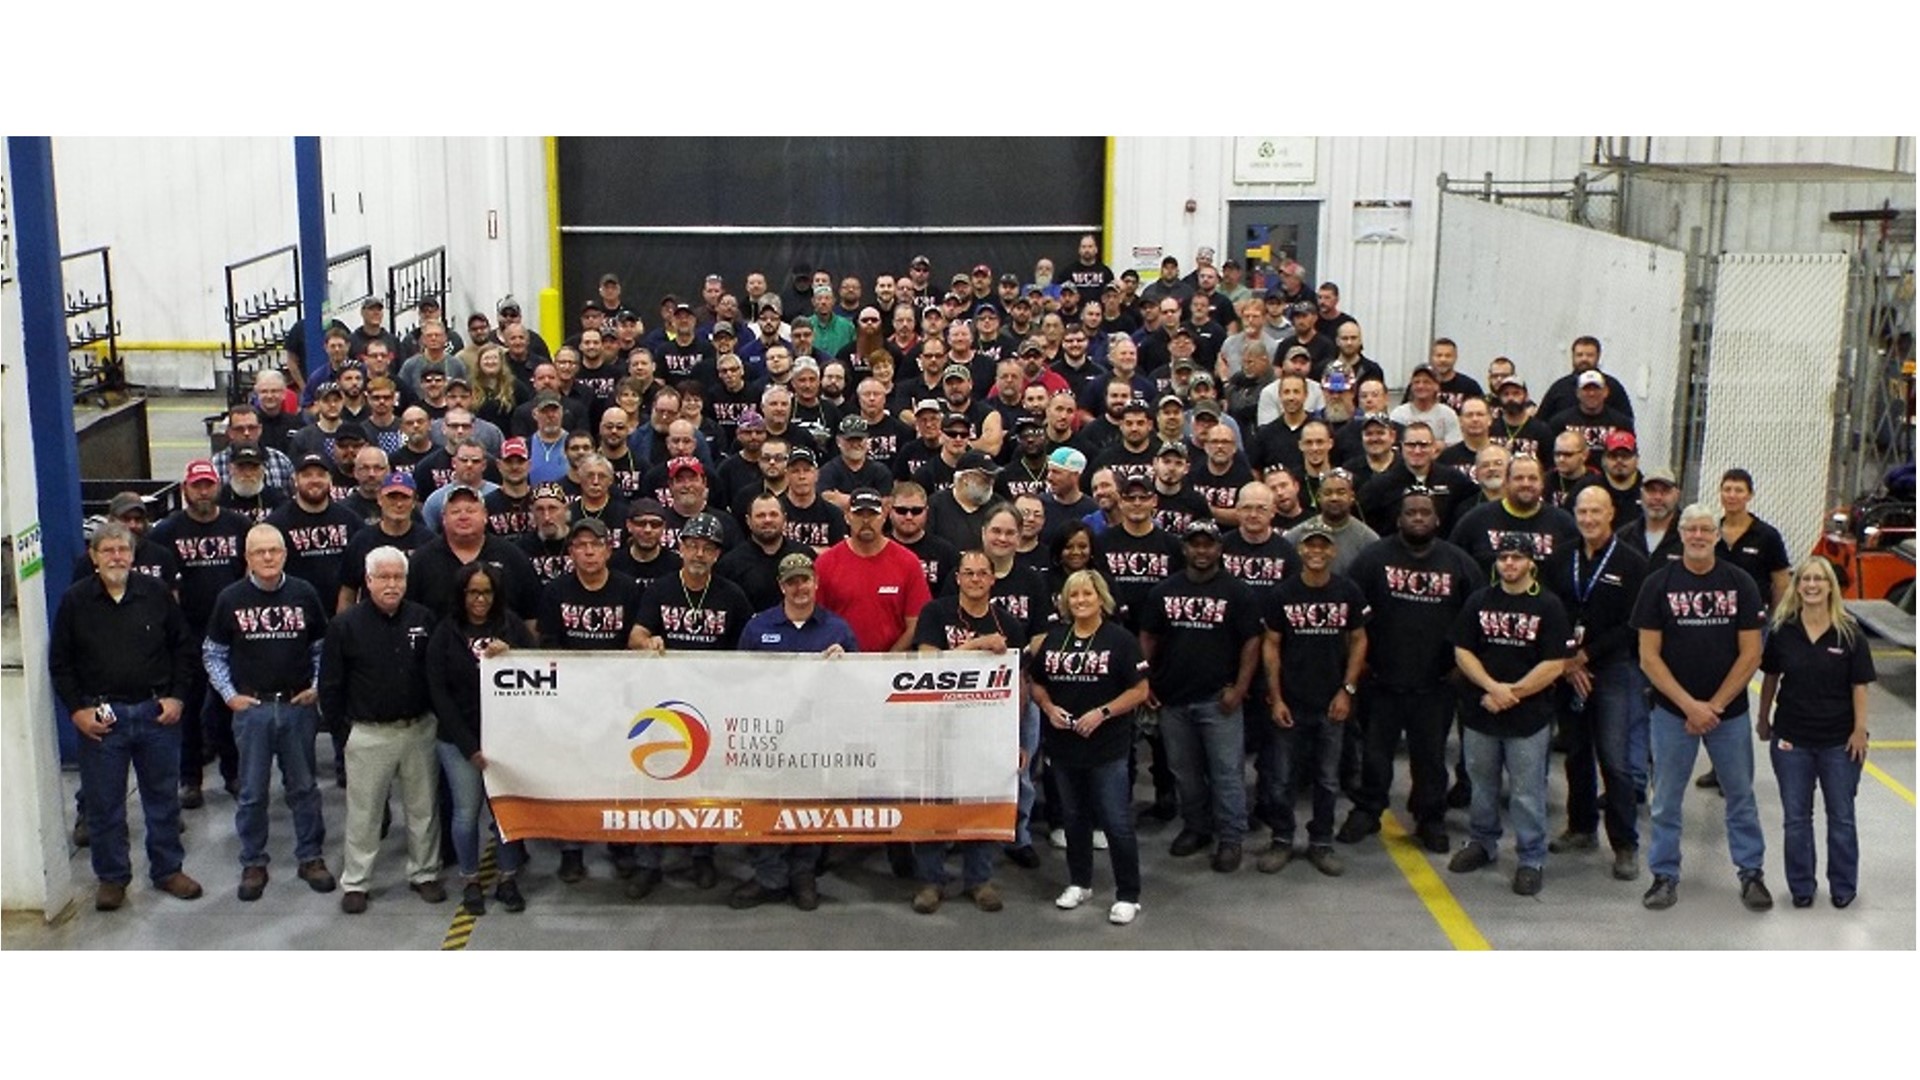 The employees at the Goodfield Plant in the USA celebrate achieving Bronze Status in the World Class Manufacturing Index